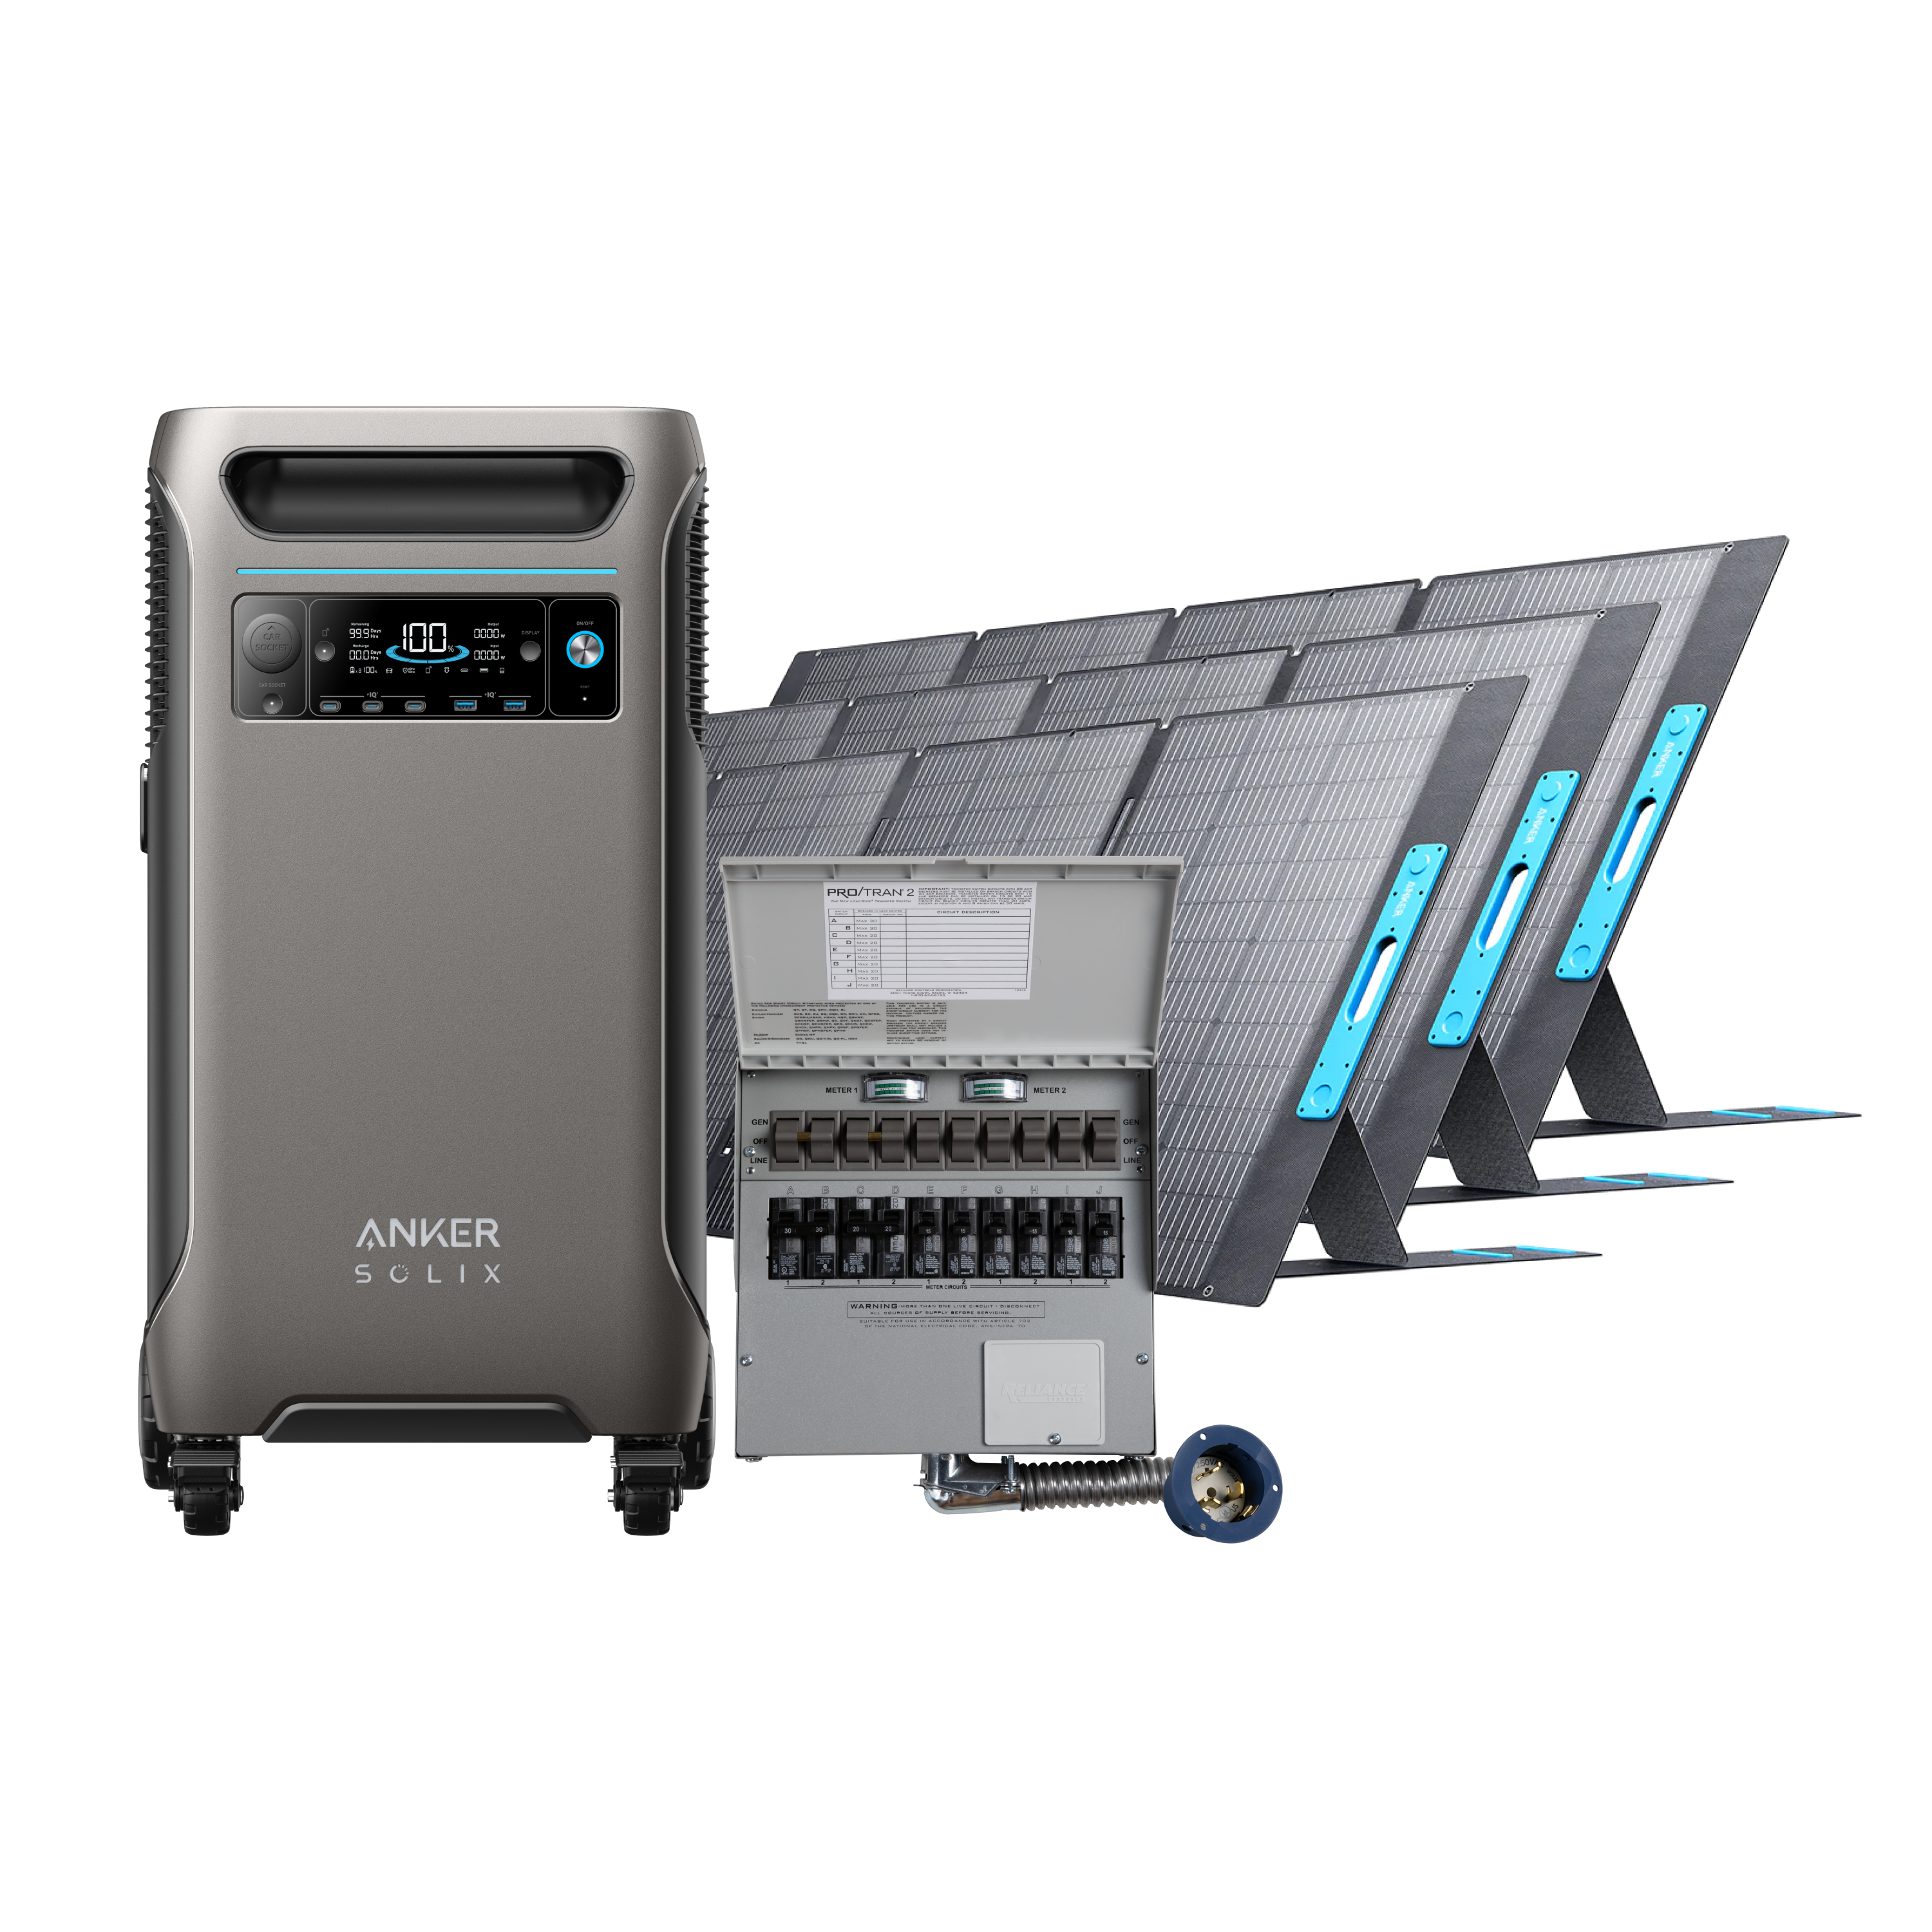 Anker SOLIX F3800 + Home Backup Kit (Transfer switch + cable) 3× Anker SOLIX Portable Solar Panel (400W)